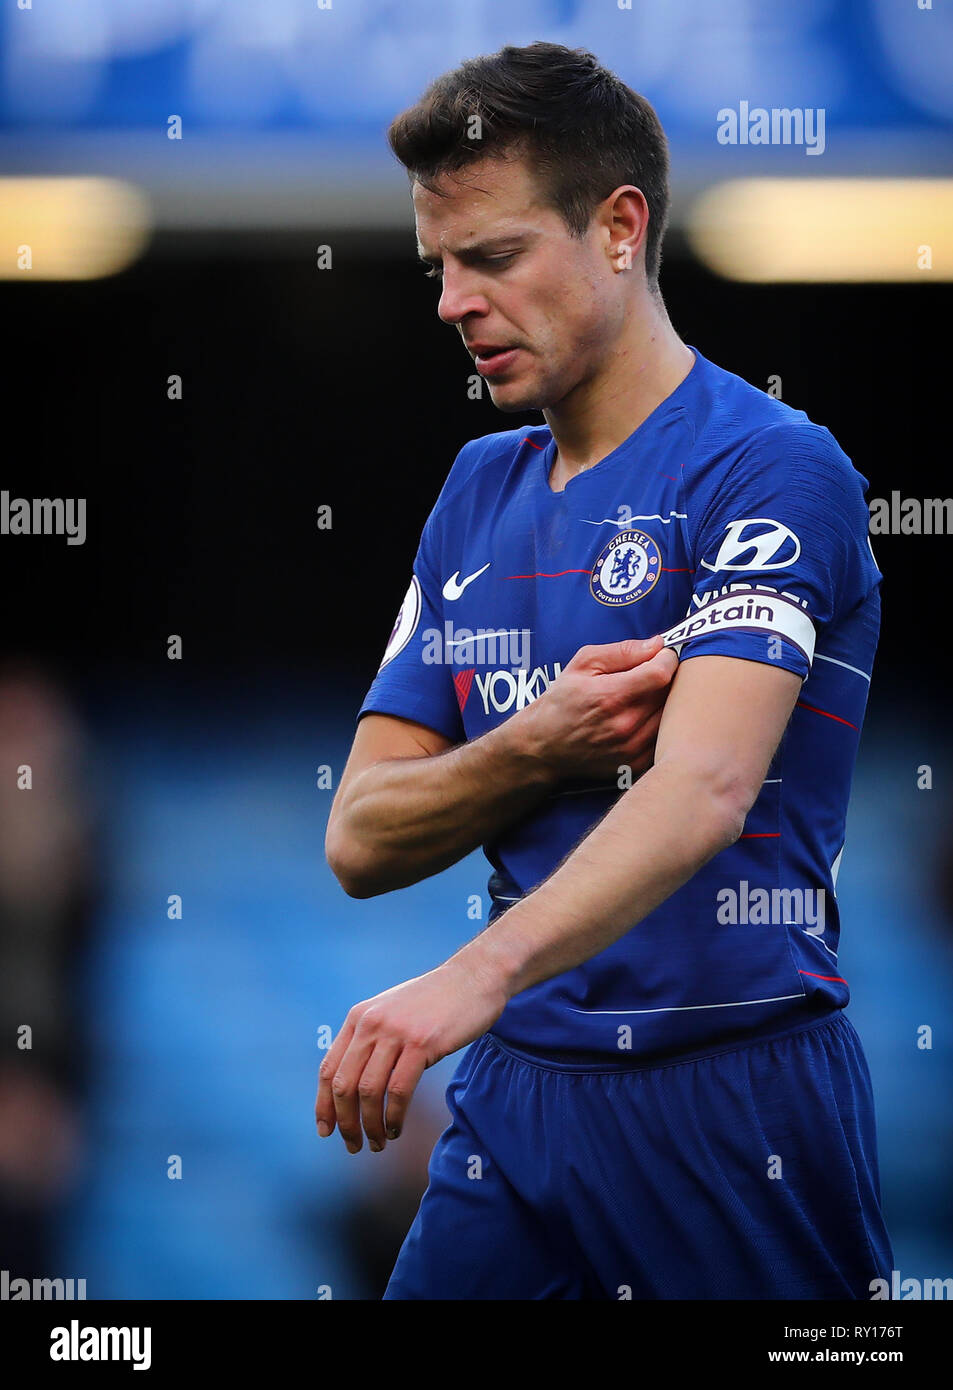 London, UK. 10th Mar, 2019. Cesar Azpilicueta of Chelsea adjusts his  captains armband - Chelsea v Wolverhampton Wanderers, Premier League,  Stamford Bridge, London - 10th March 2019 Editorial Use Only - DataCo